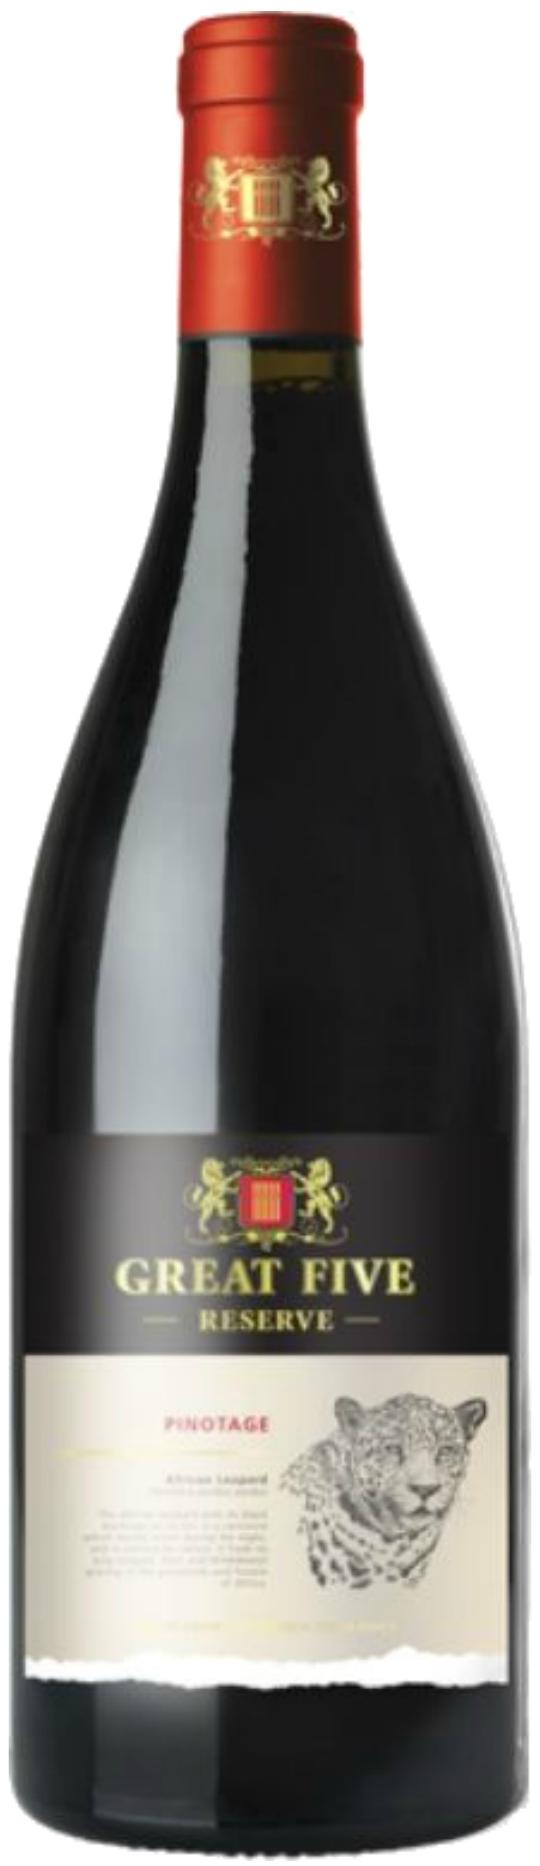 Stellenview Great Five Reserve Pinotage (Rotwein, Südafrika, Western Cape)  | Curry Premium Wines oHG